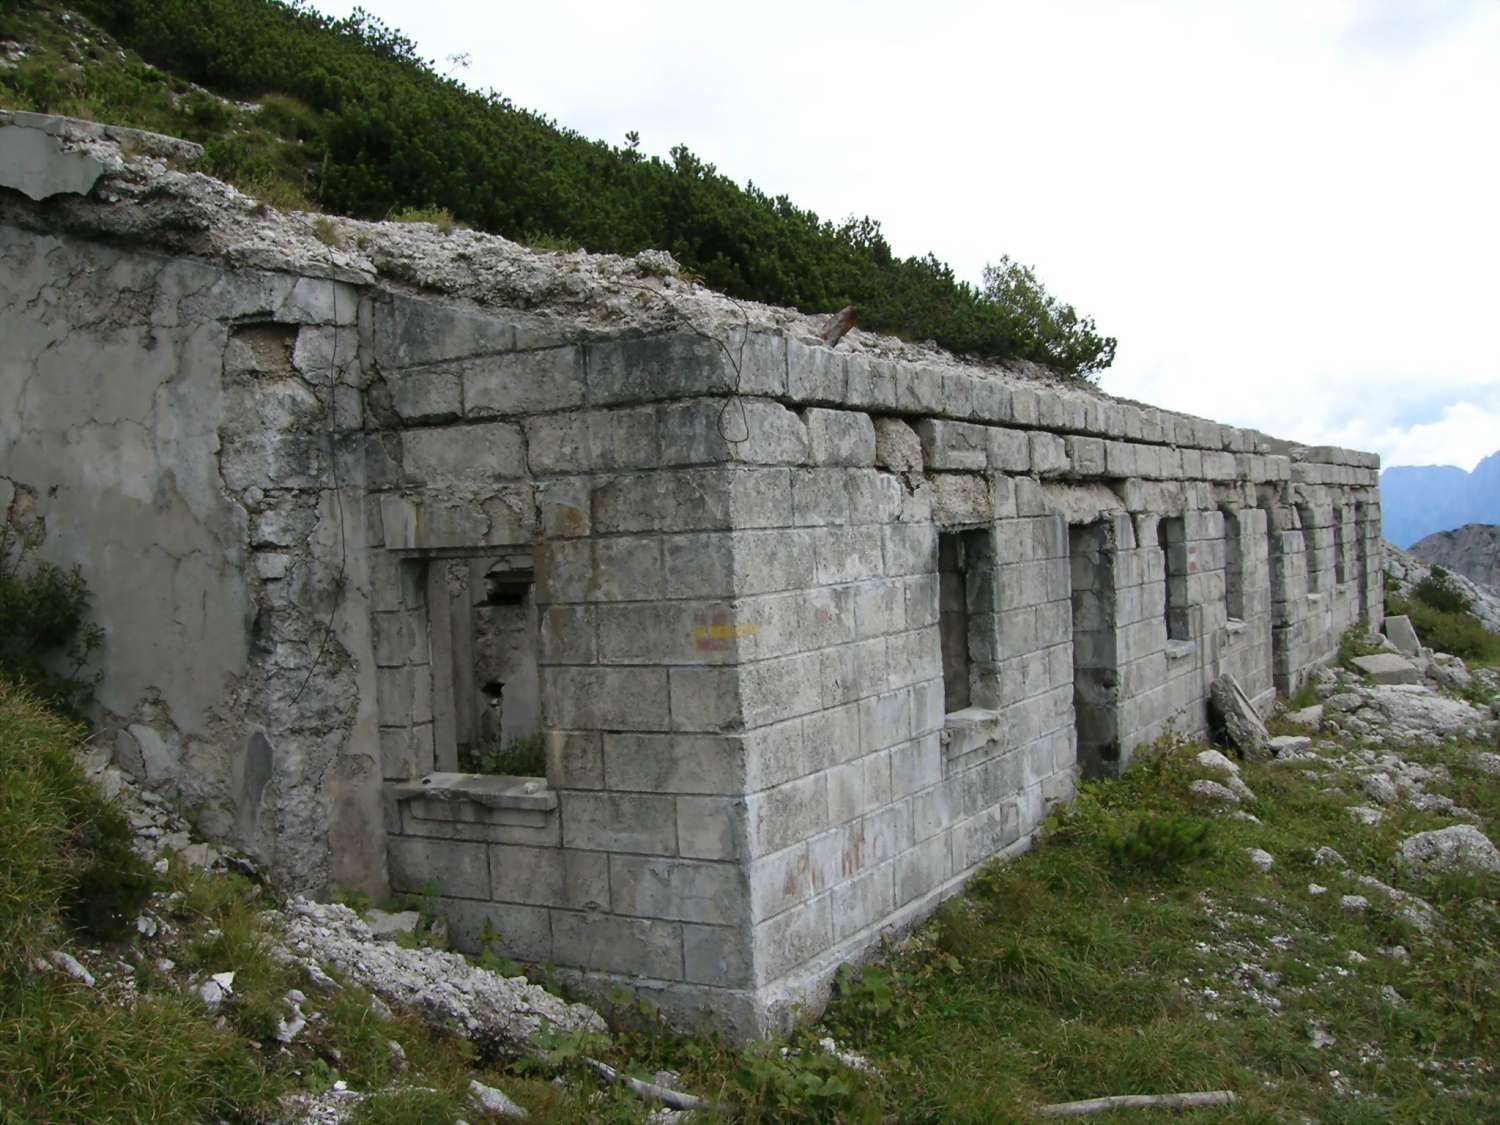 The Great World War blockhouse: 188 KB; click on the image to enlarge